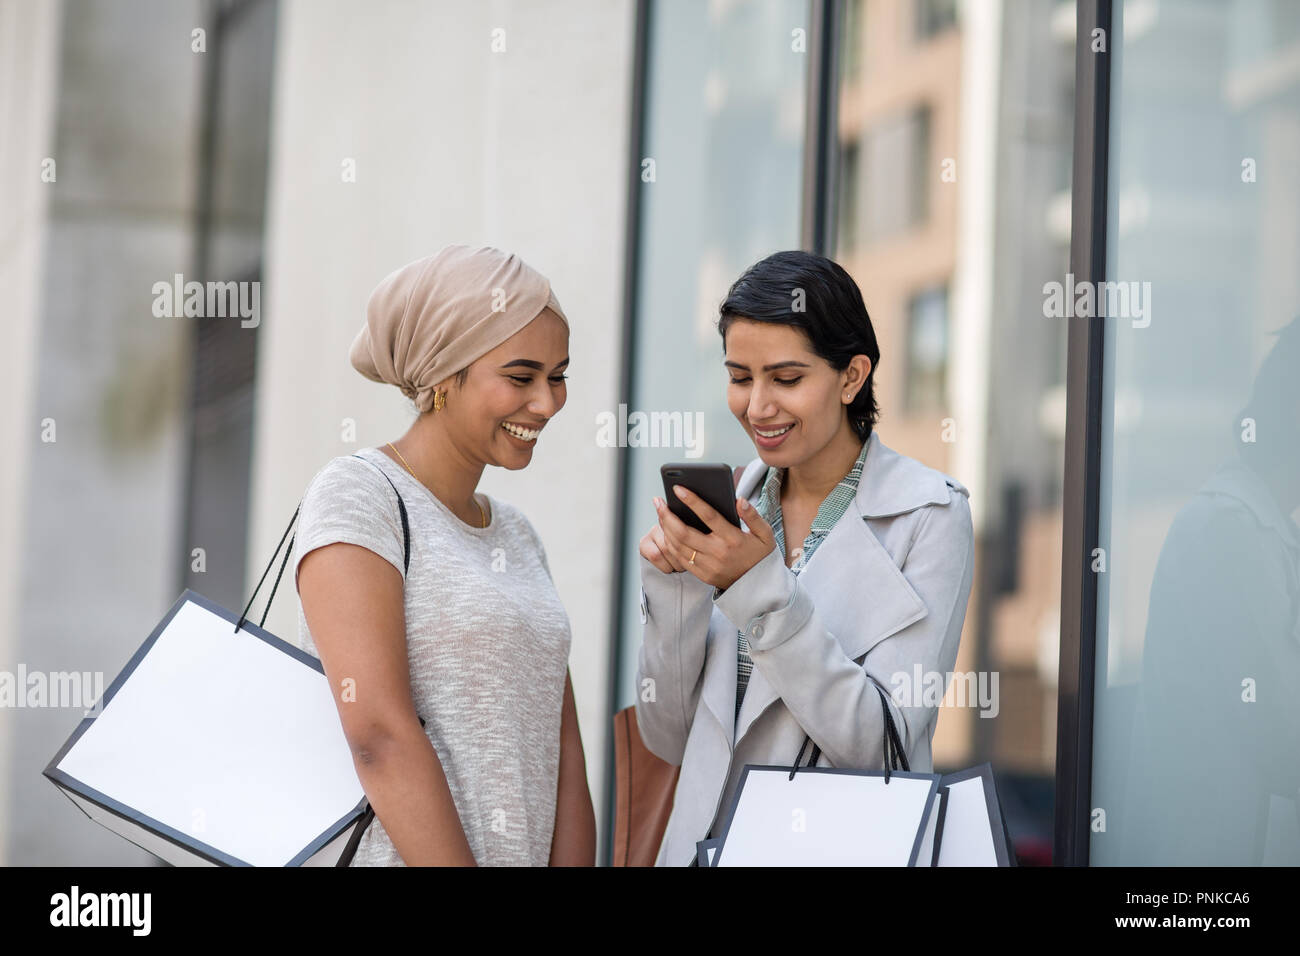 Muslim friends using a smartphone on a shopping trip Stock Photo